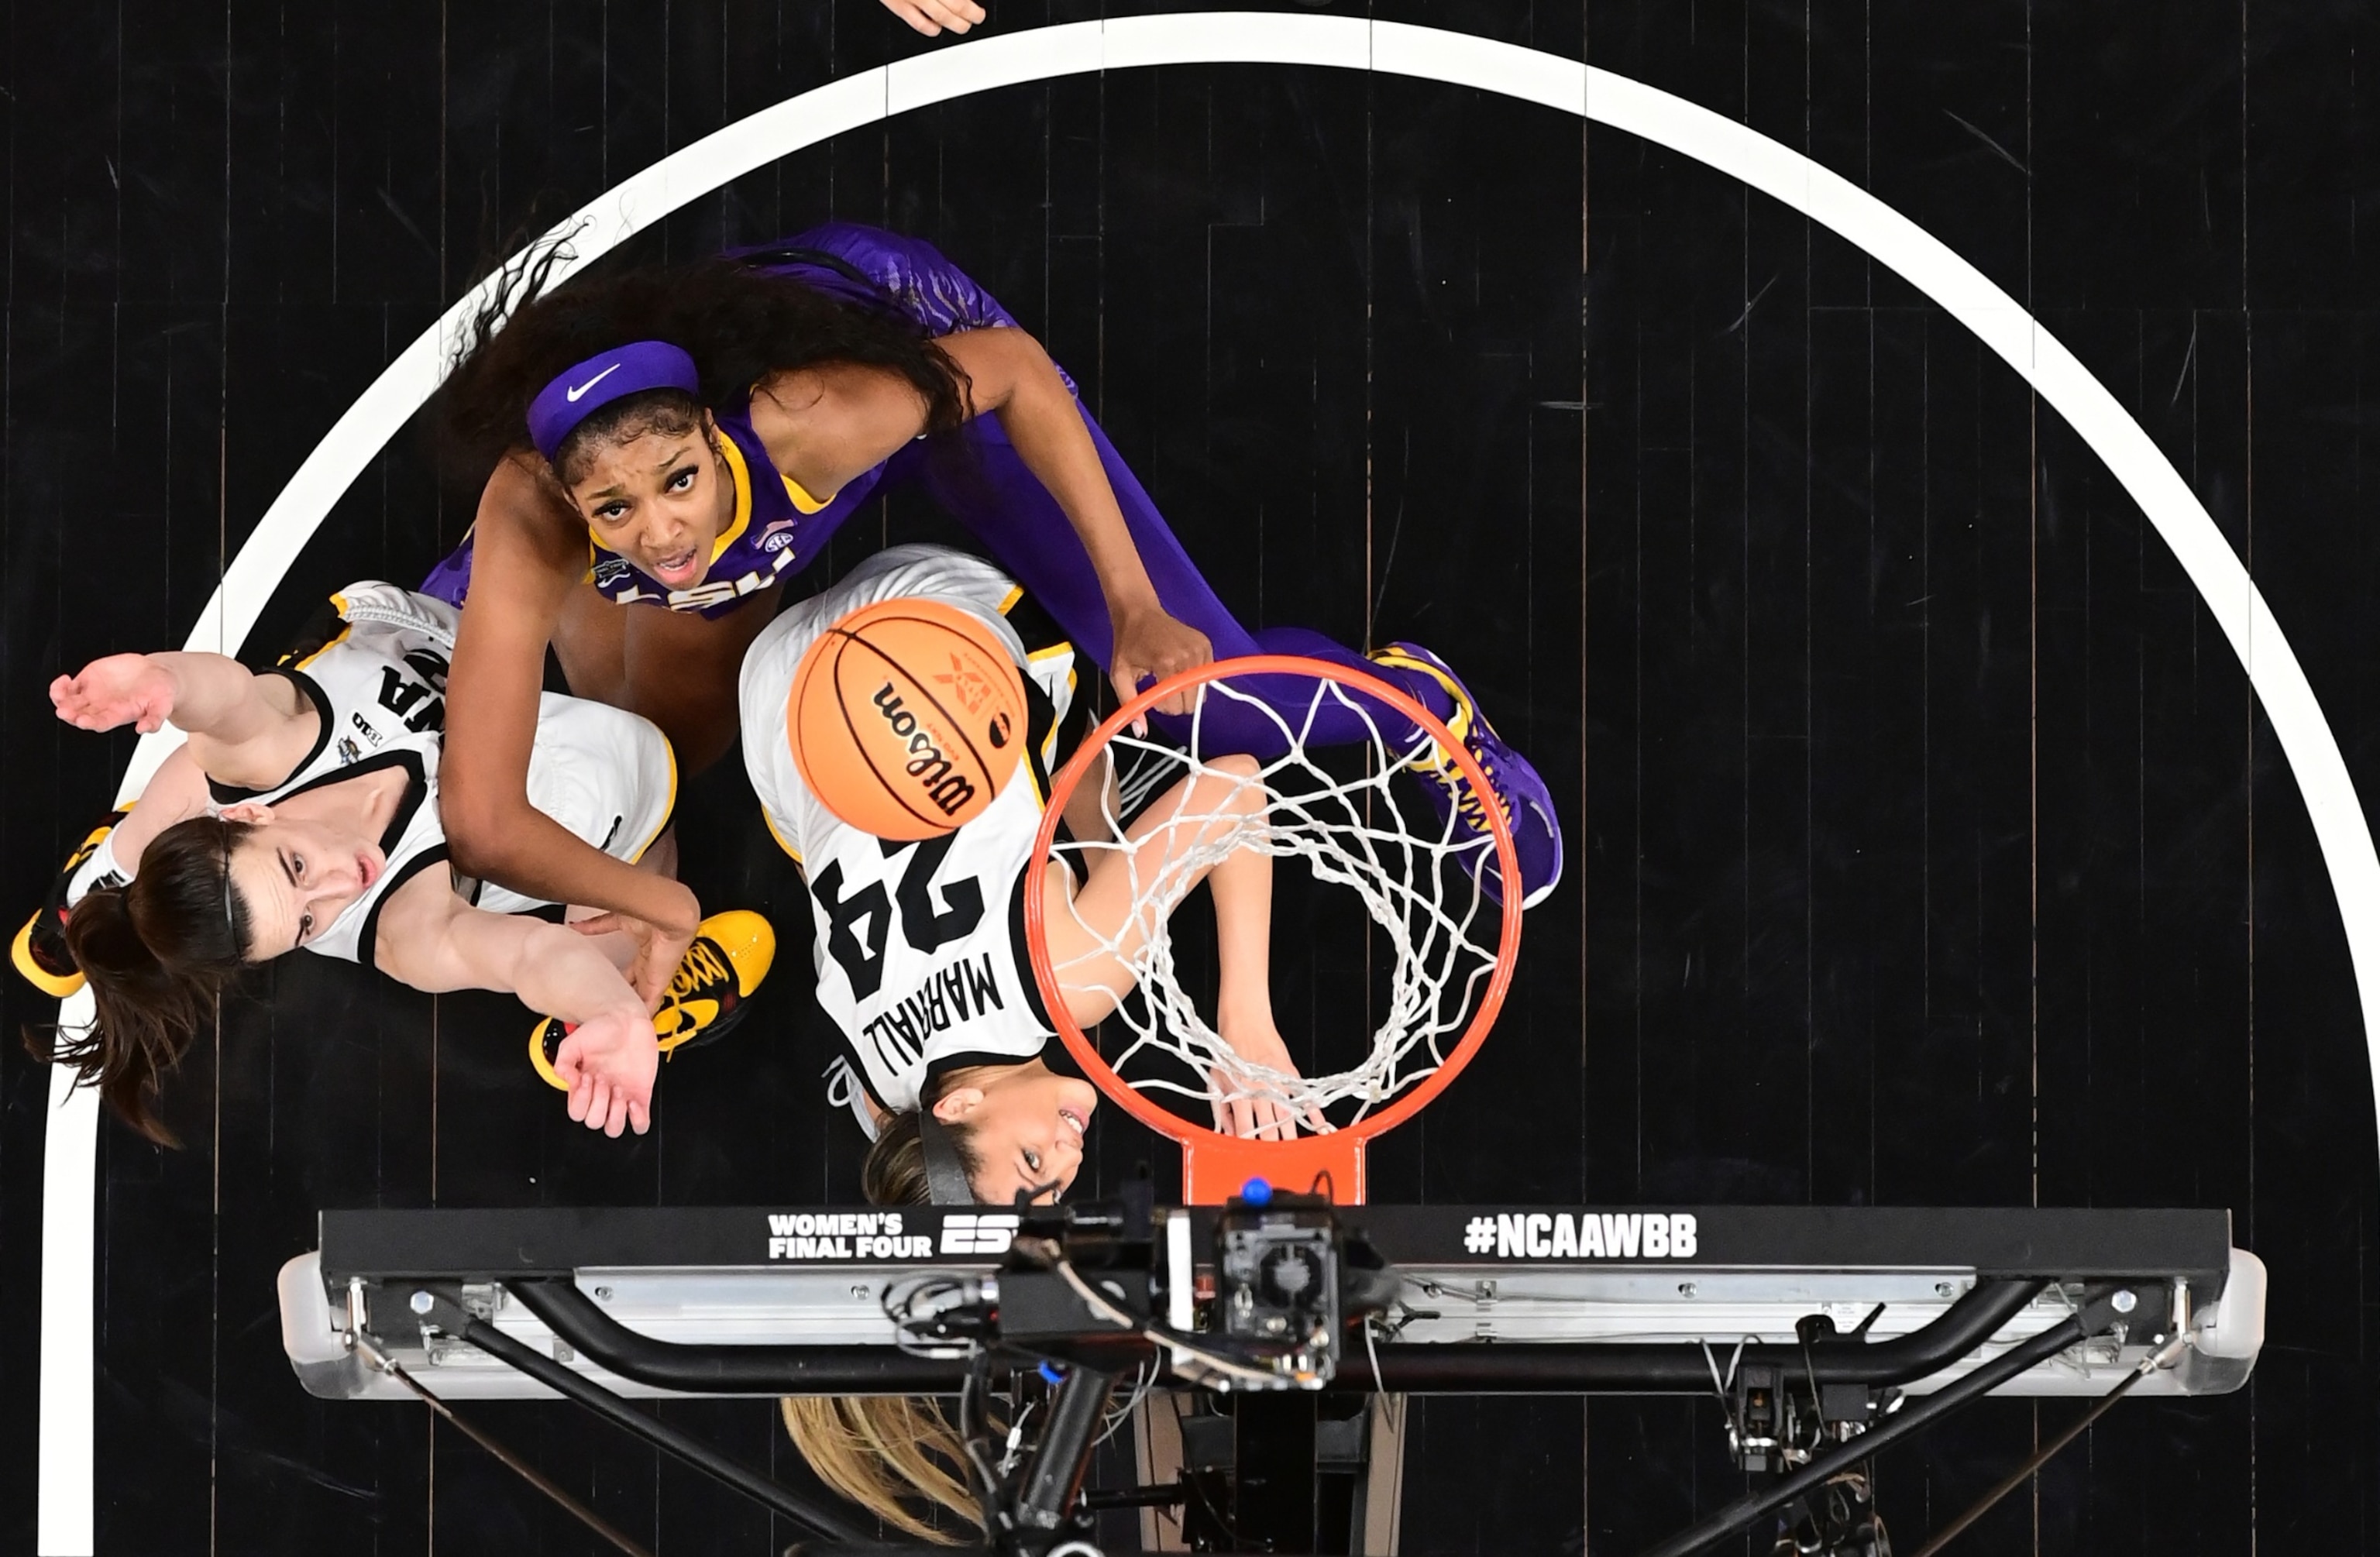 PHOTO: In this April 2, 2023, file photo, Angel Reese of the LSU Lady Tigers and Caitlin Clark and Gabbie Marshall of the Iowa Hawkeyes are shown during the 2023 NCAA Women's Basketball Tournament National Championship, in Dallas, Texas. 